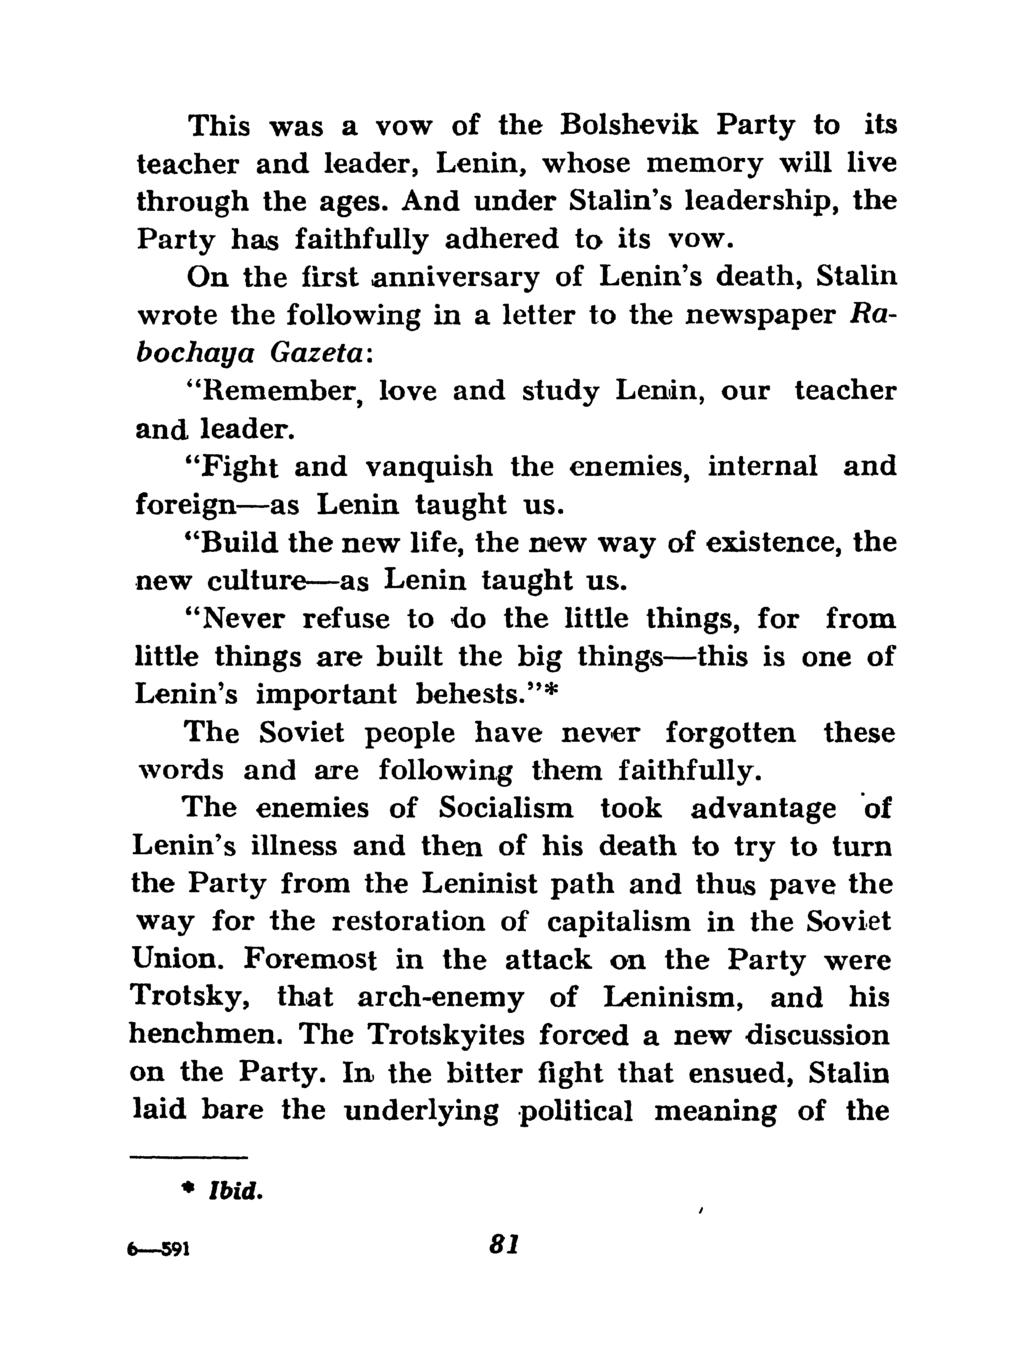 This was a vow of the Bolshevik Party to its teacher and leader, Lenin, whose memory will live through the ages. And under Stalin's leadership, the Party has faithfully adhered to its vow.